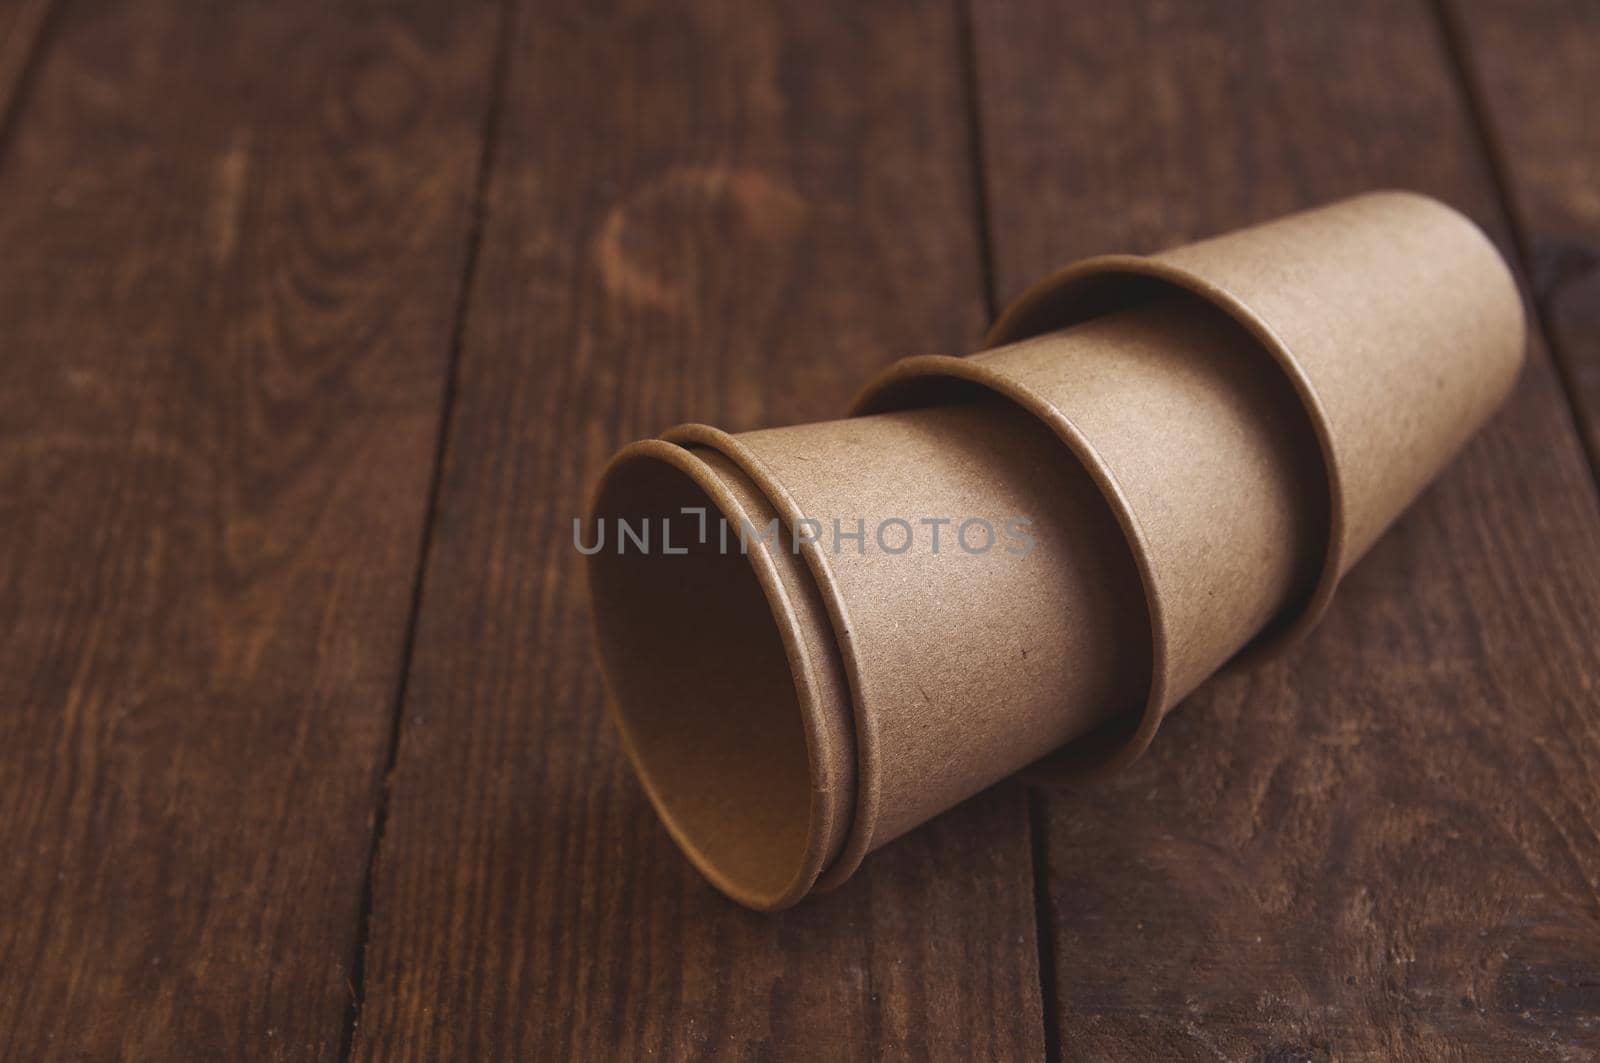 ecological kraft paper cups for coffee and tea dark brown by ozornina